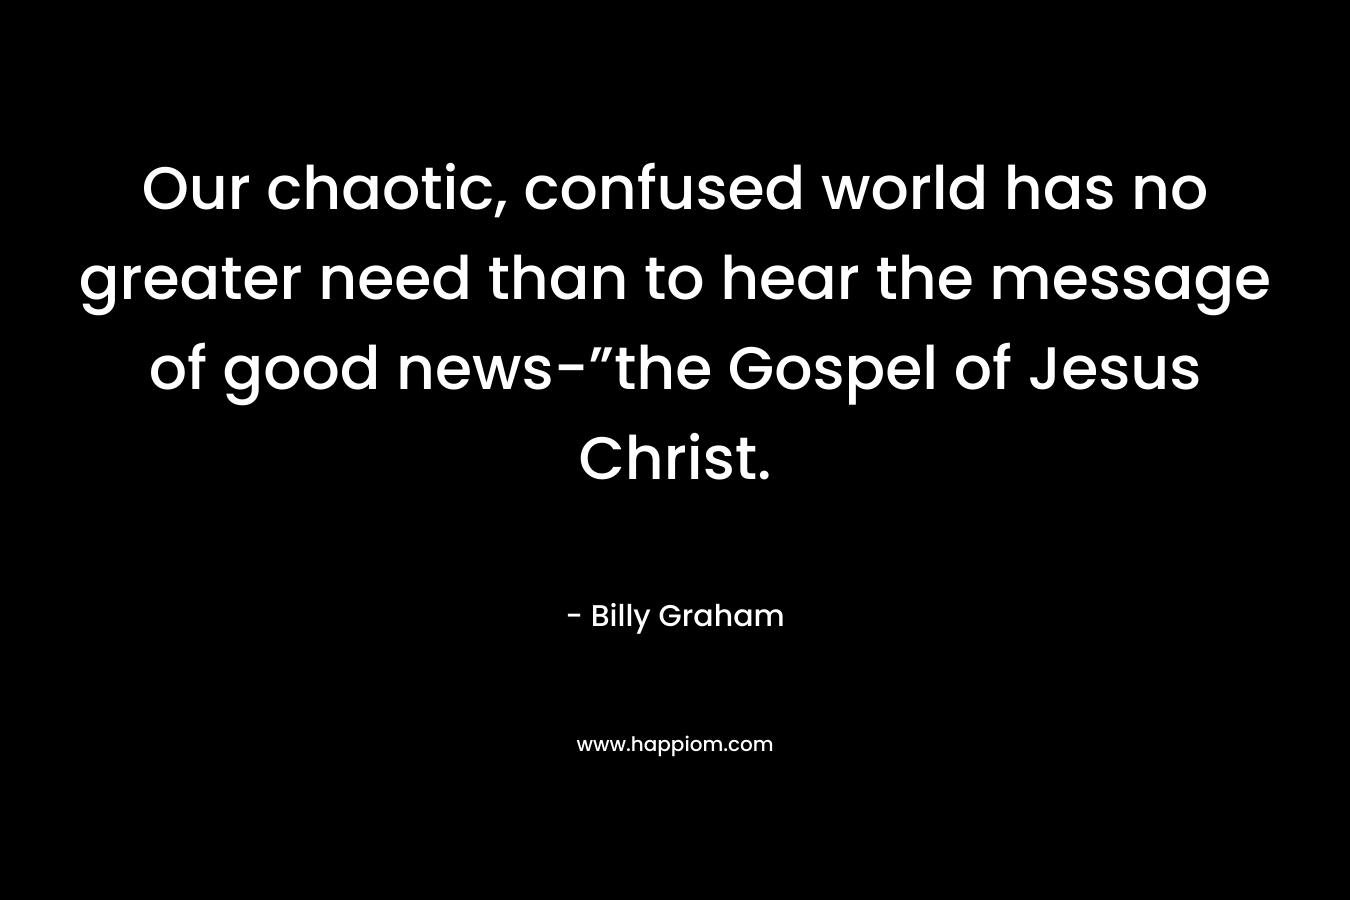 Our chaotic, confused world has no greater need than to hear the message of good news-”the Gospel of Jesus Christ. – Billy Graham